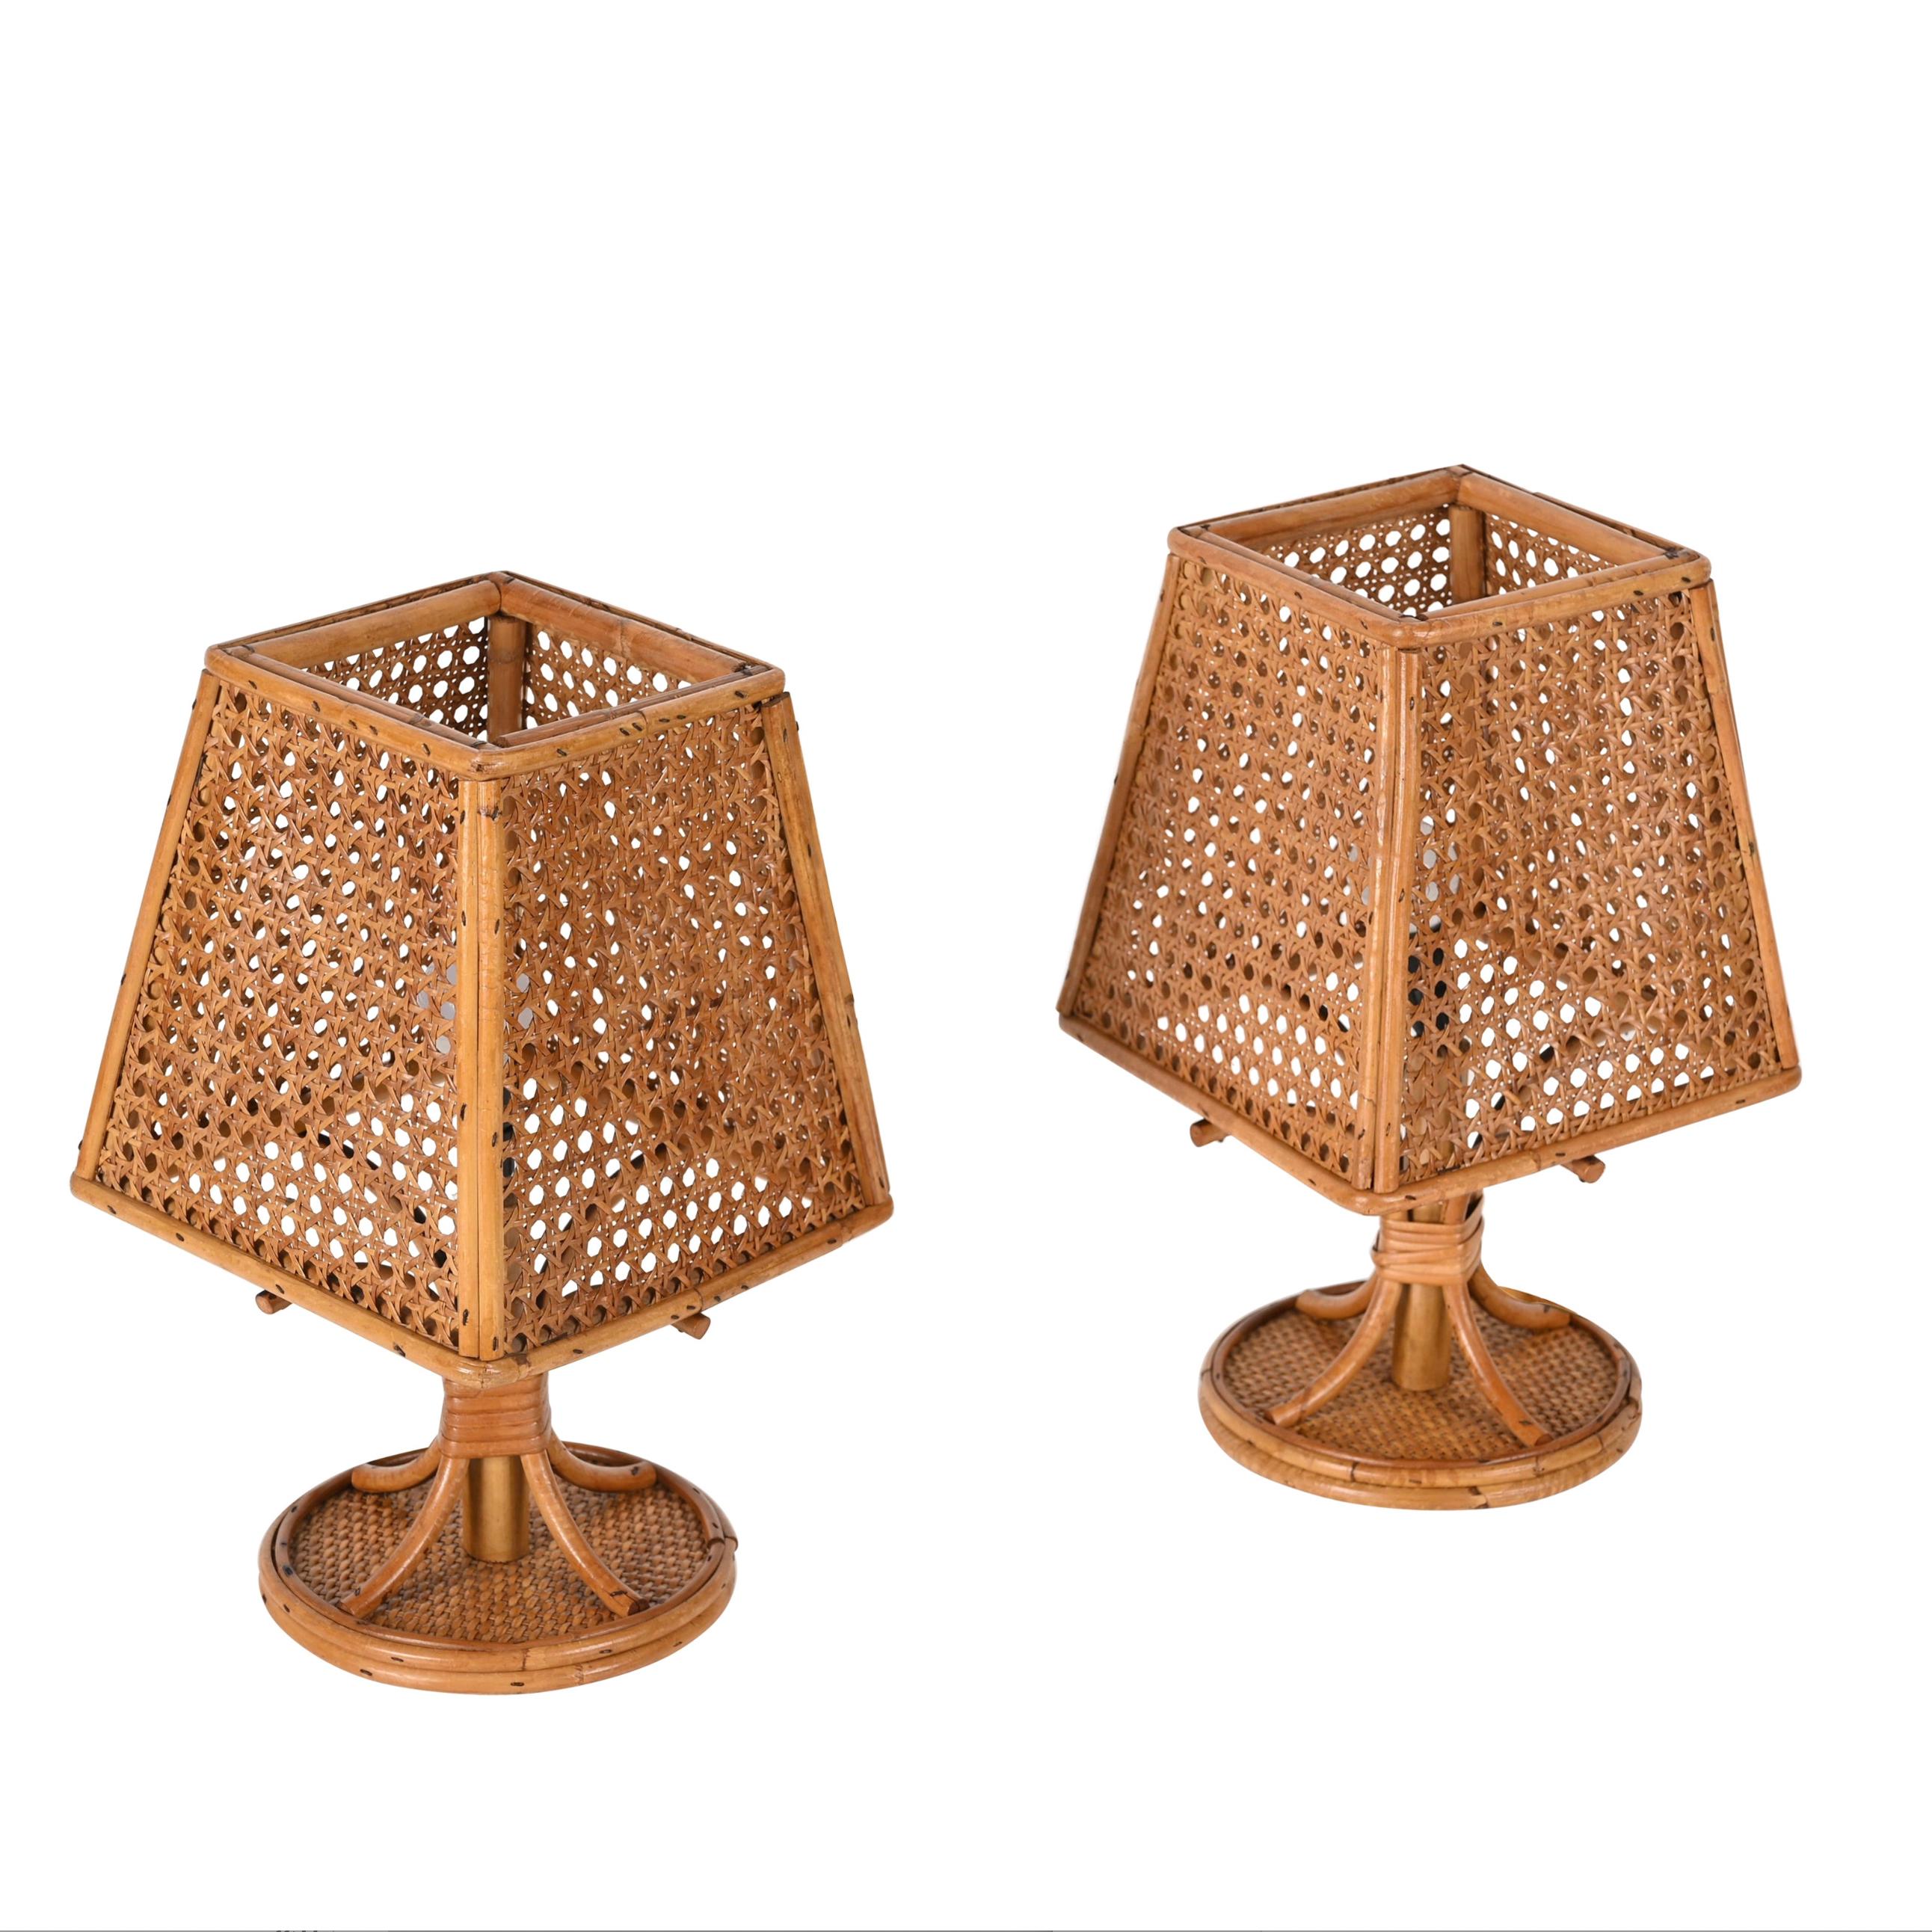 Hand-Woven Pair of French Riviera Table Lamps in Wicker and Rattan, Italy 1960s